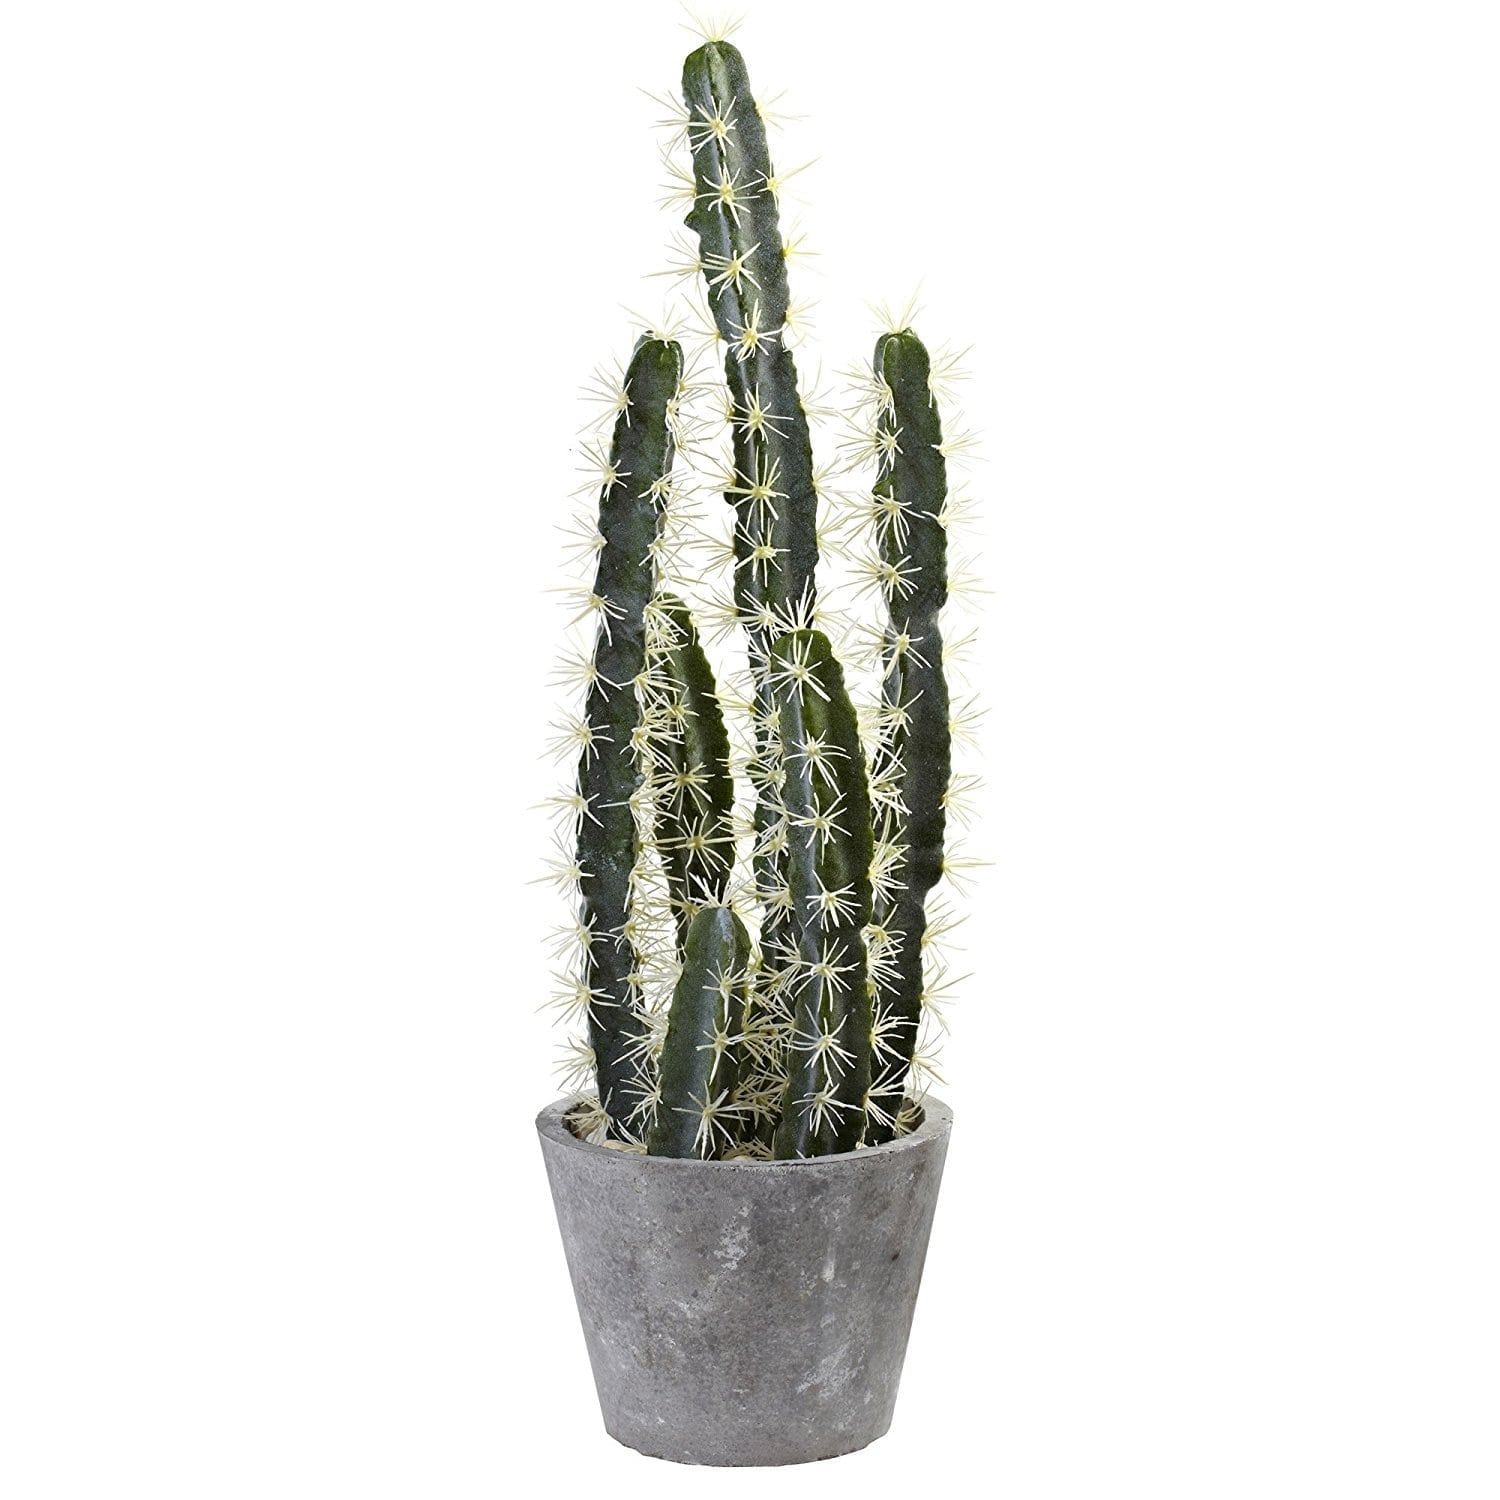 Decorating With Faux Plants | Faux Cactus Garden In Cement Planter